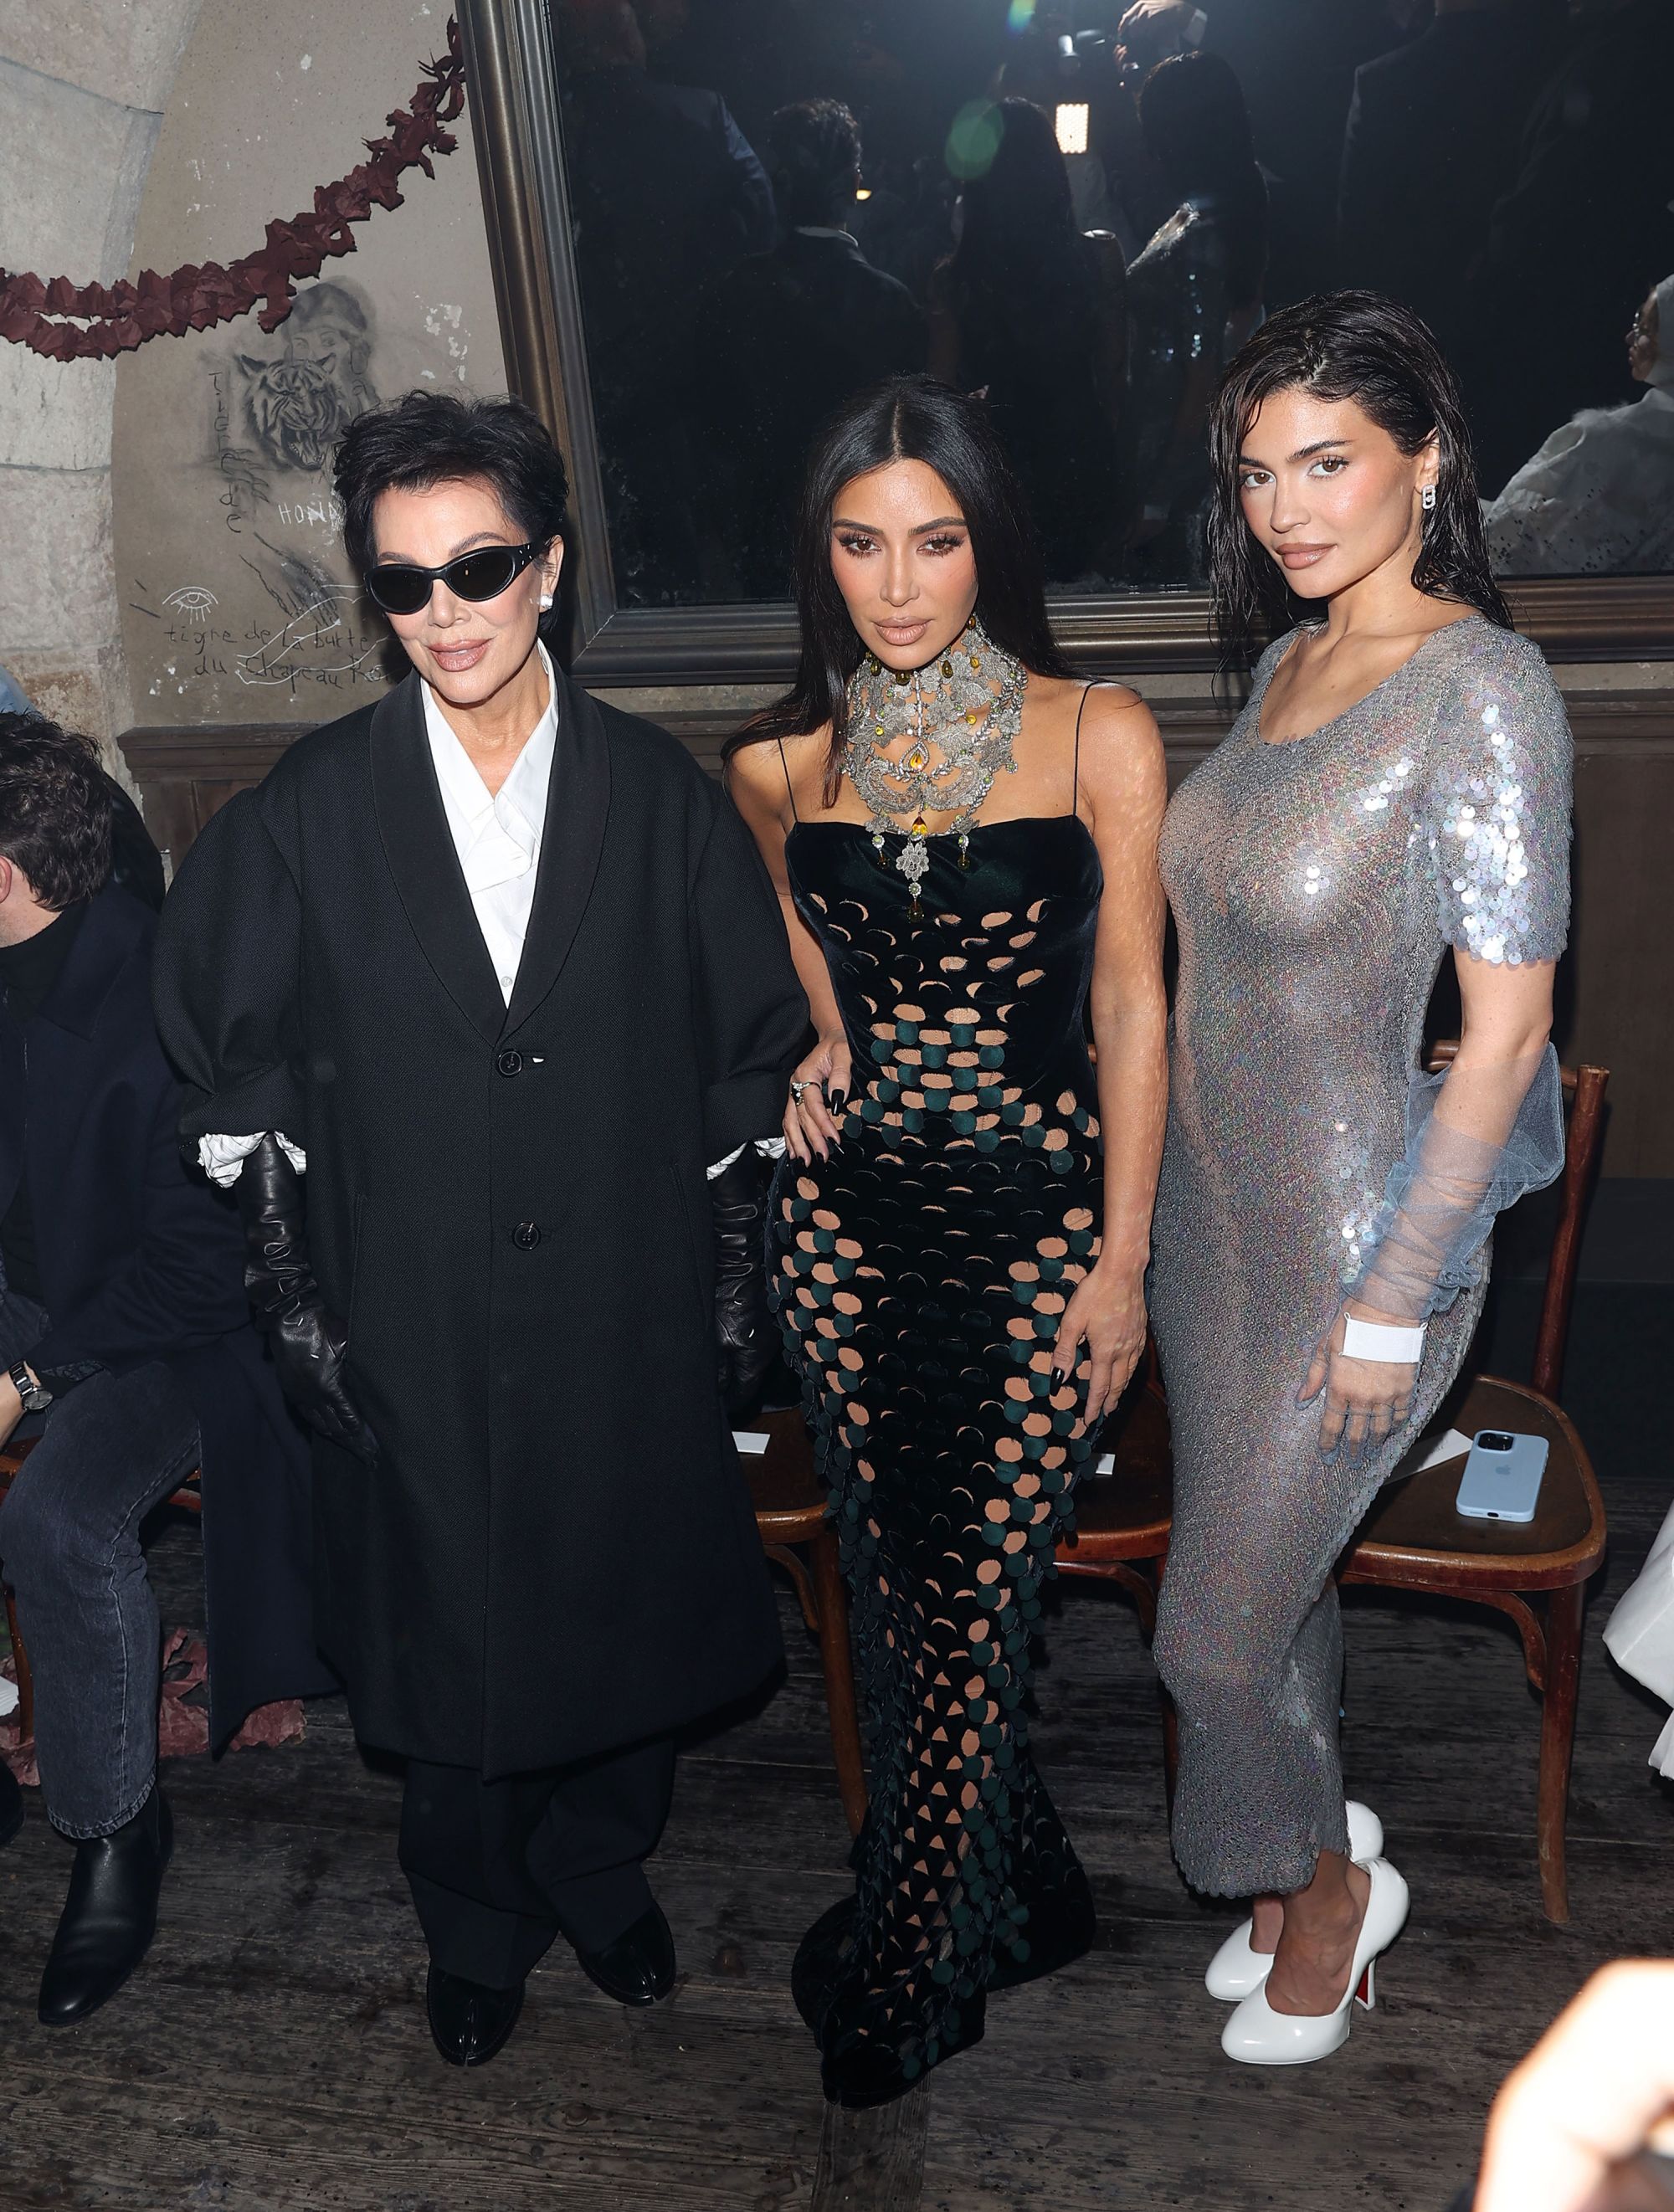 Kris Jenner, Kim Kardashian and Kylie Jenner are seen arriving at the Maison Margiela Fashion show on January 25 in Paris, France.